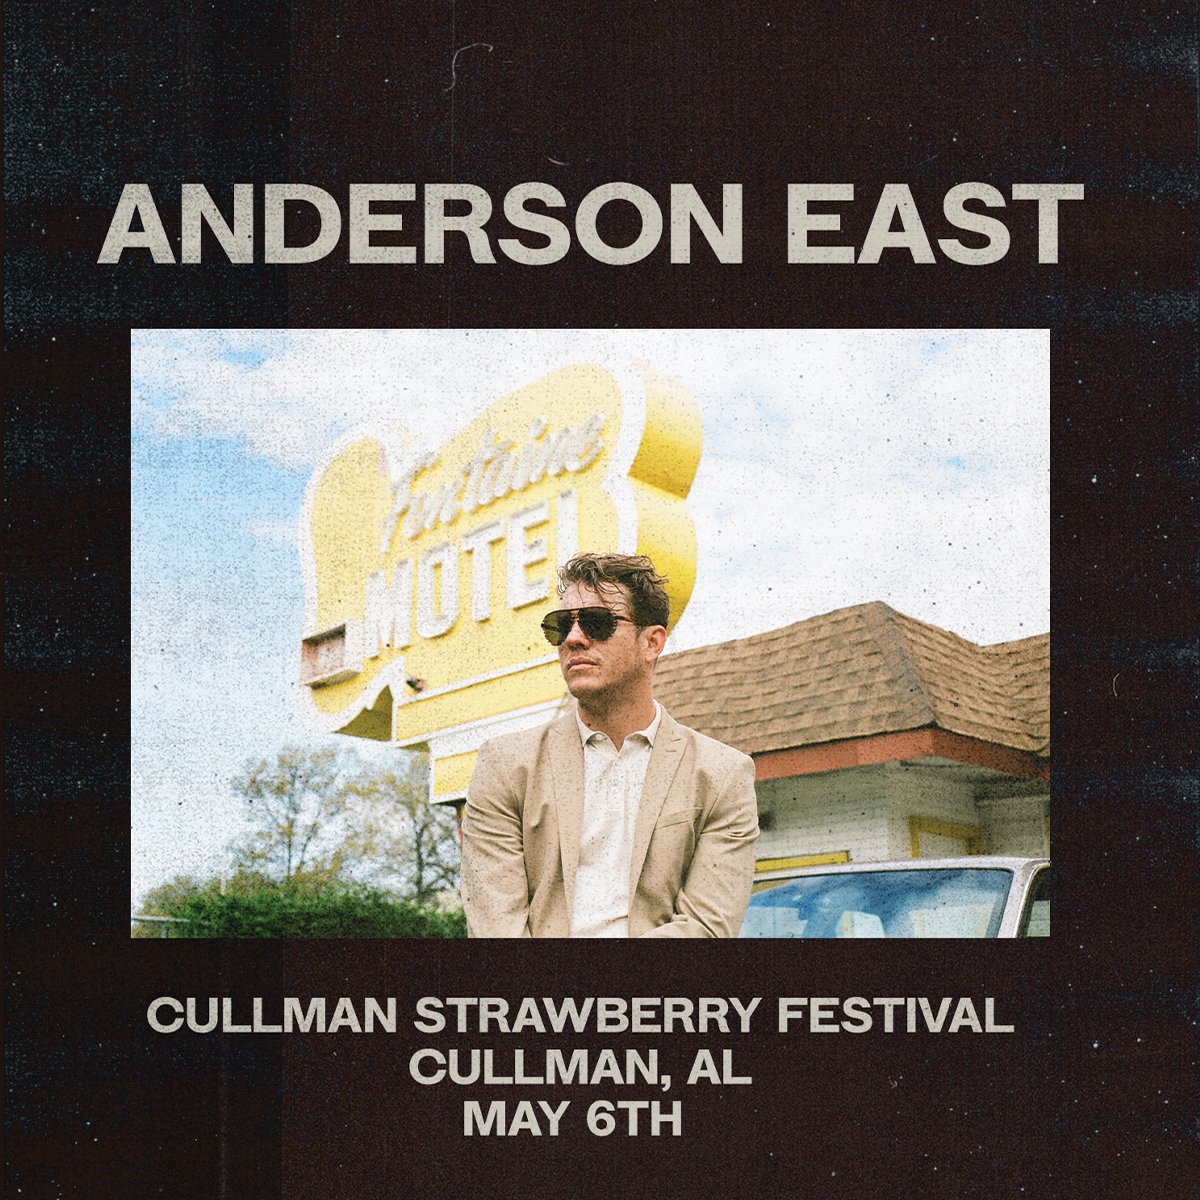 Excited to play Strawberry Festival in Cullman, AL May 6th